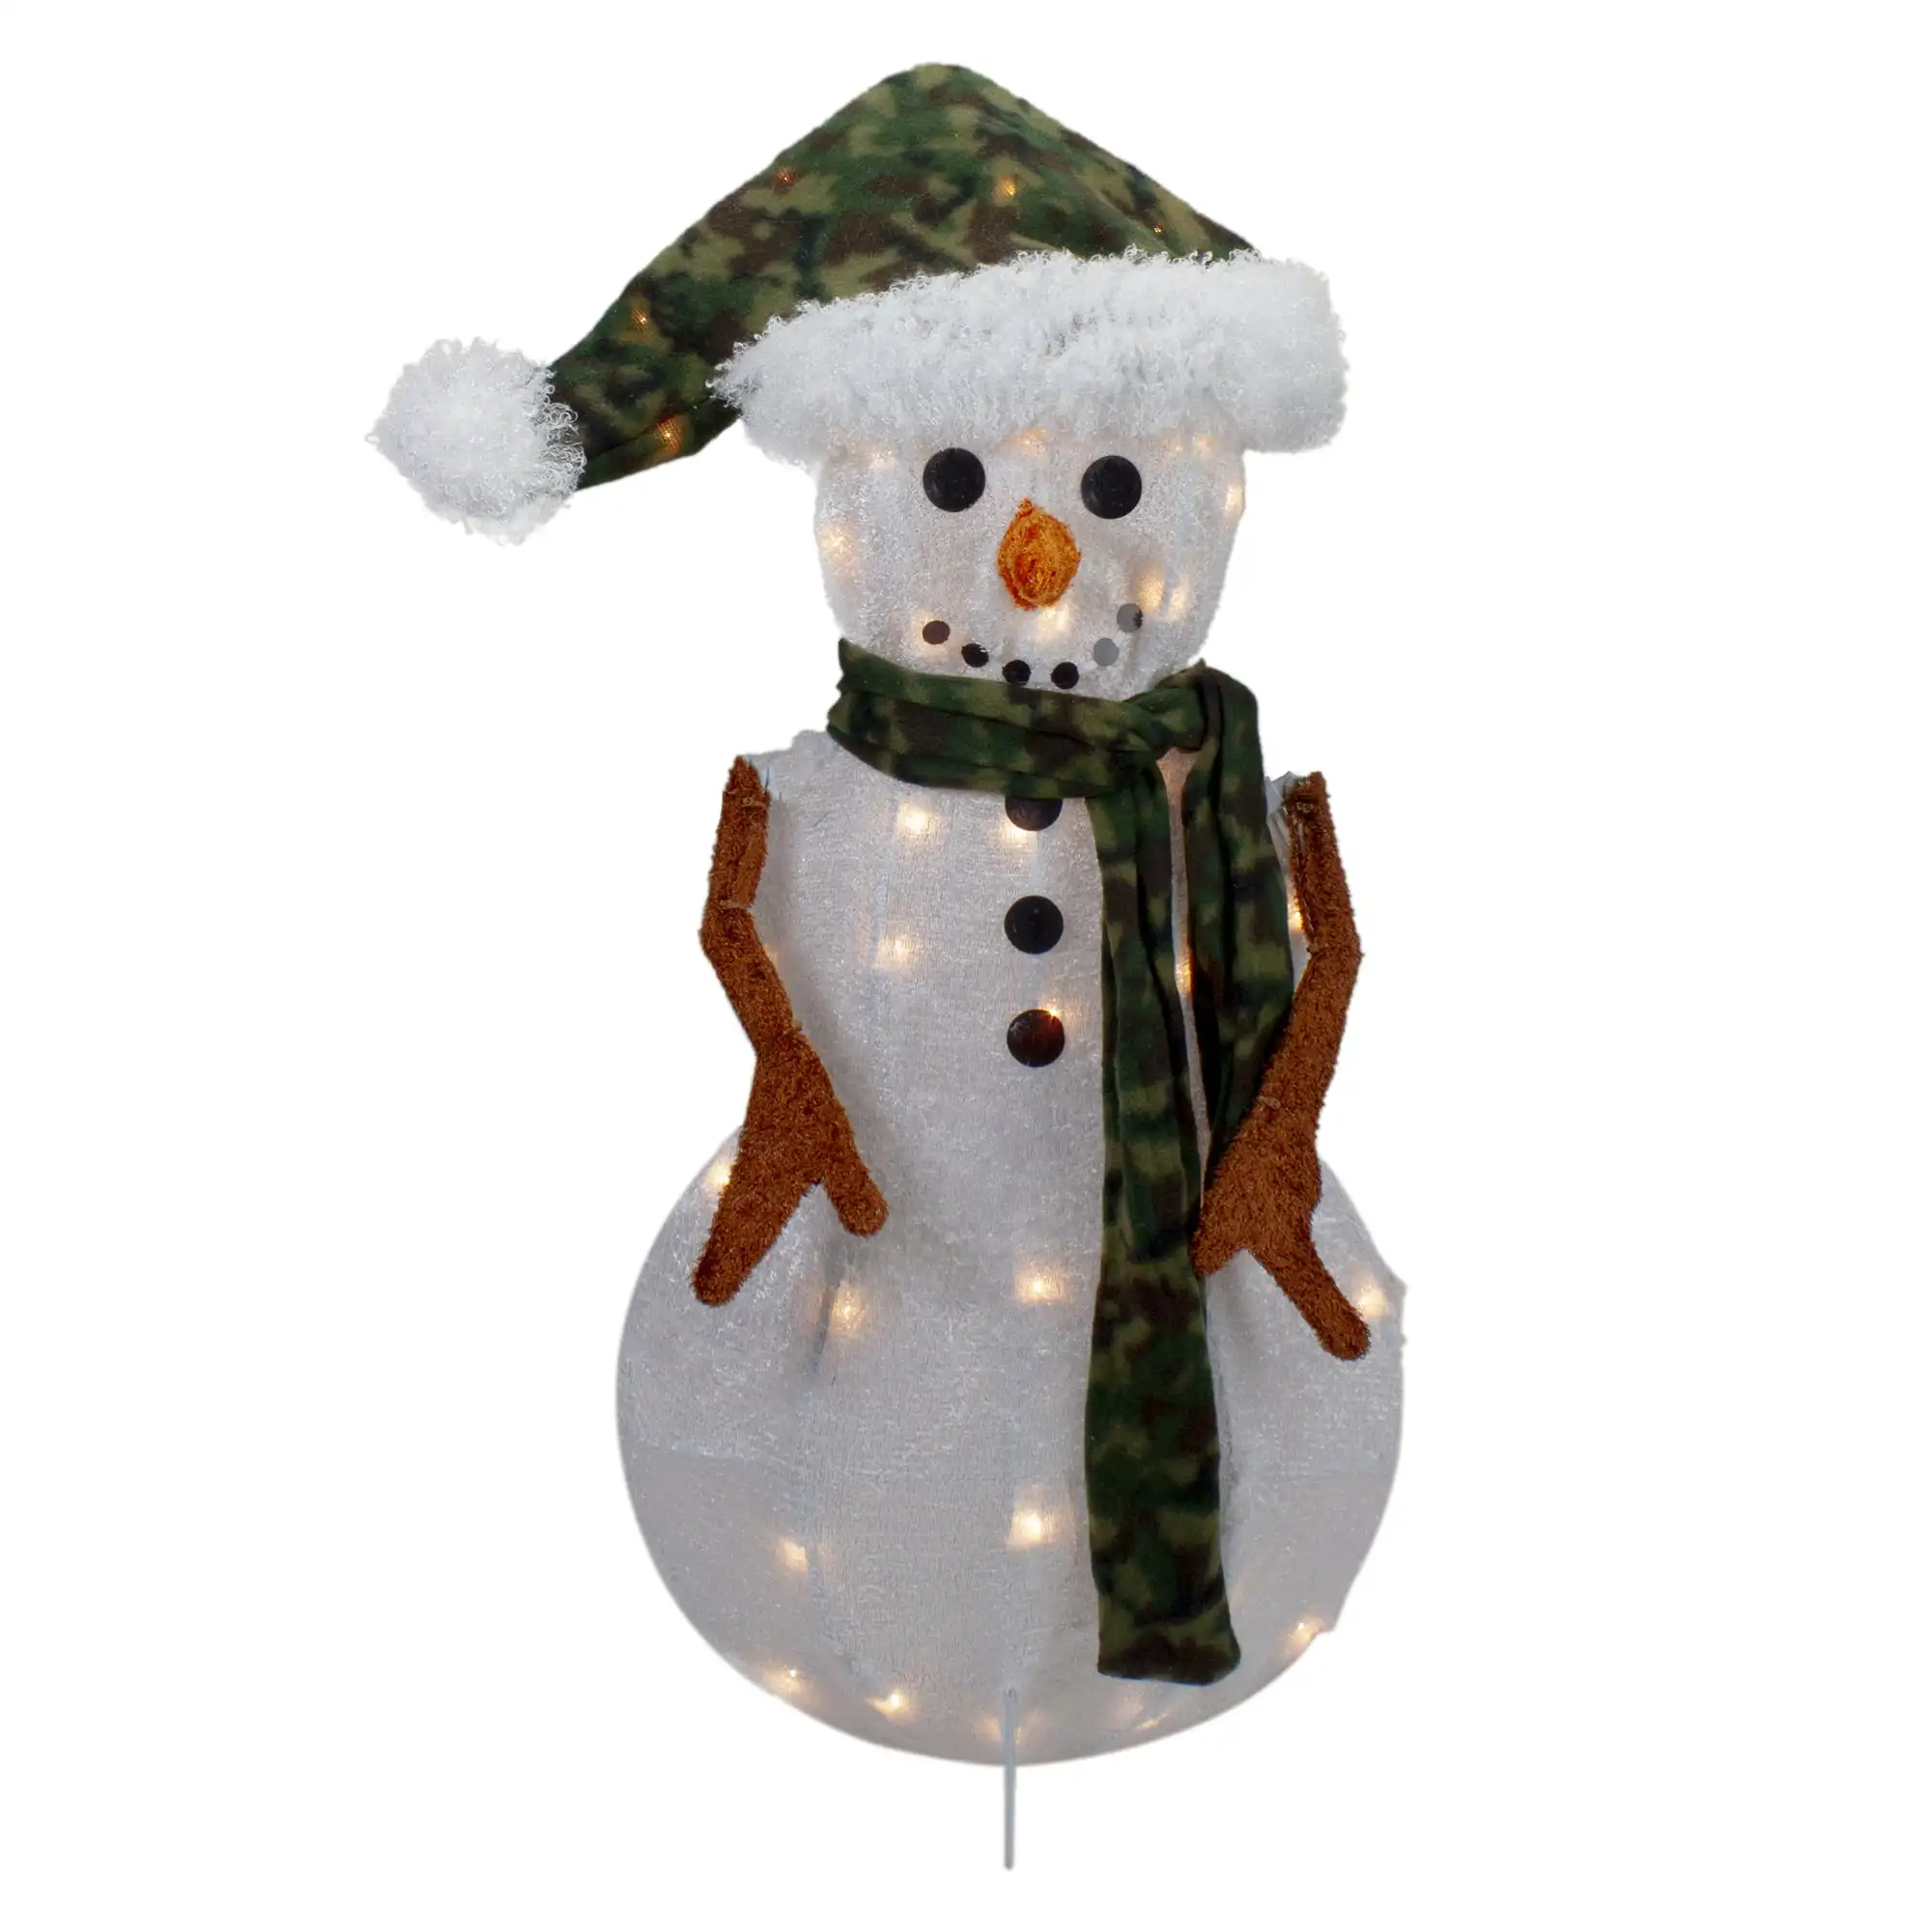 

24" Lighted White and Green Chenille Snowman Outdoor Christmas Decoration